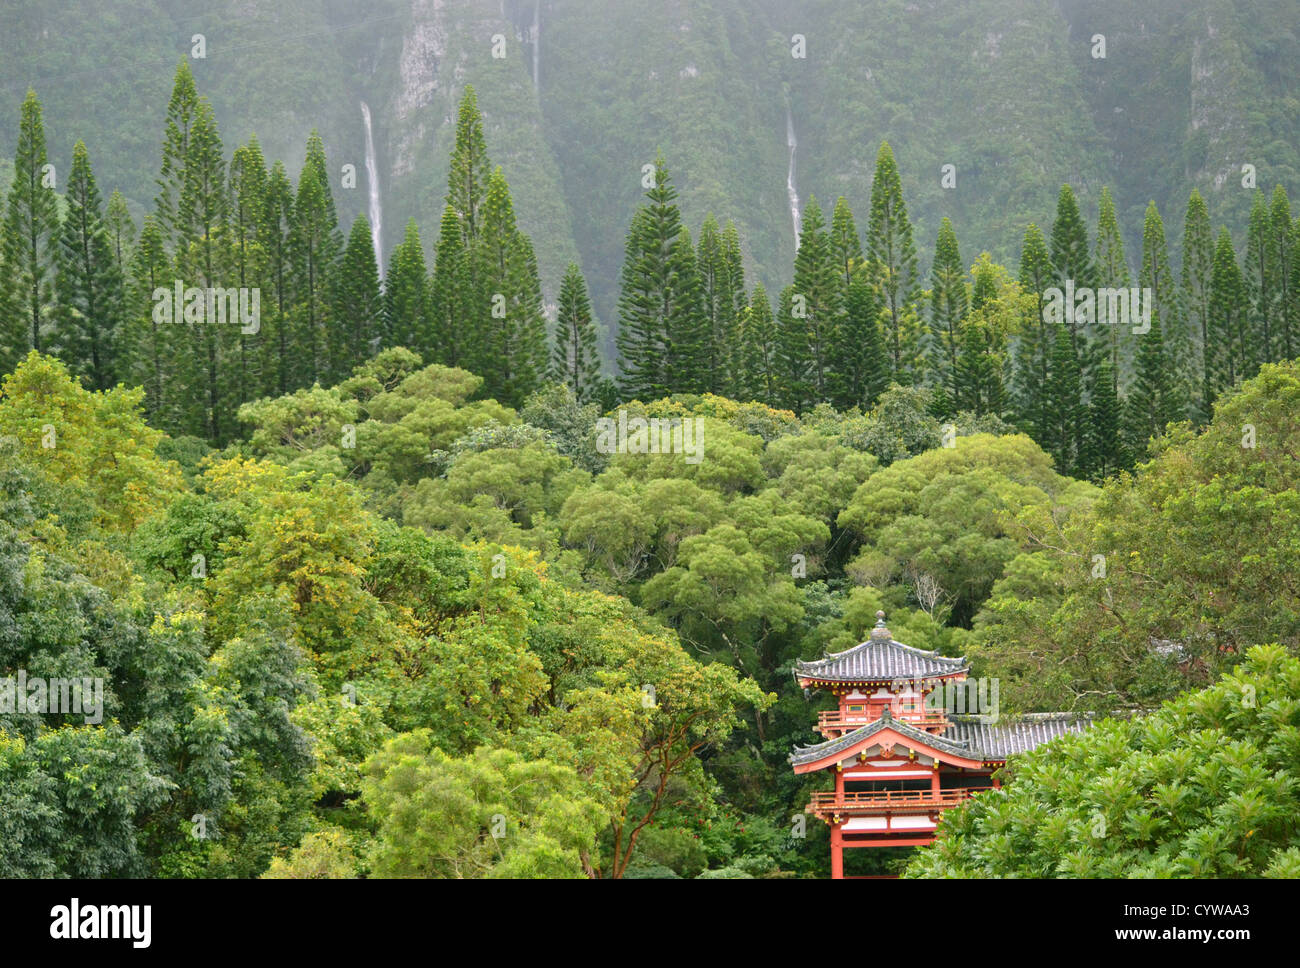 Byodo-in Buddhist Temple, Valley of the Temples Memorial Park, Kahaluu, Oahu, Hawaii, USA Stock Photo